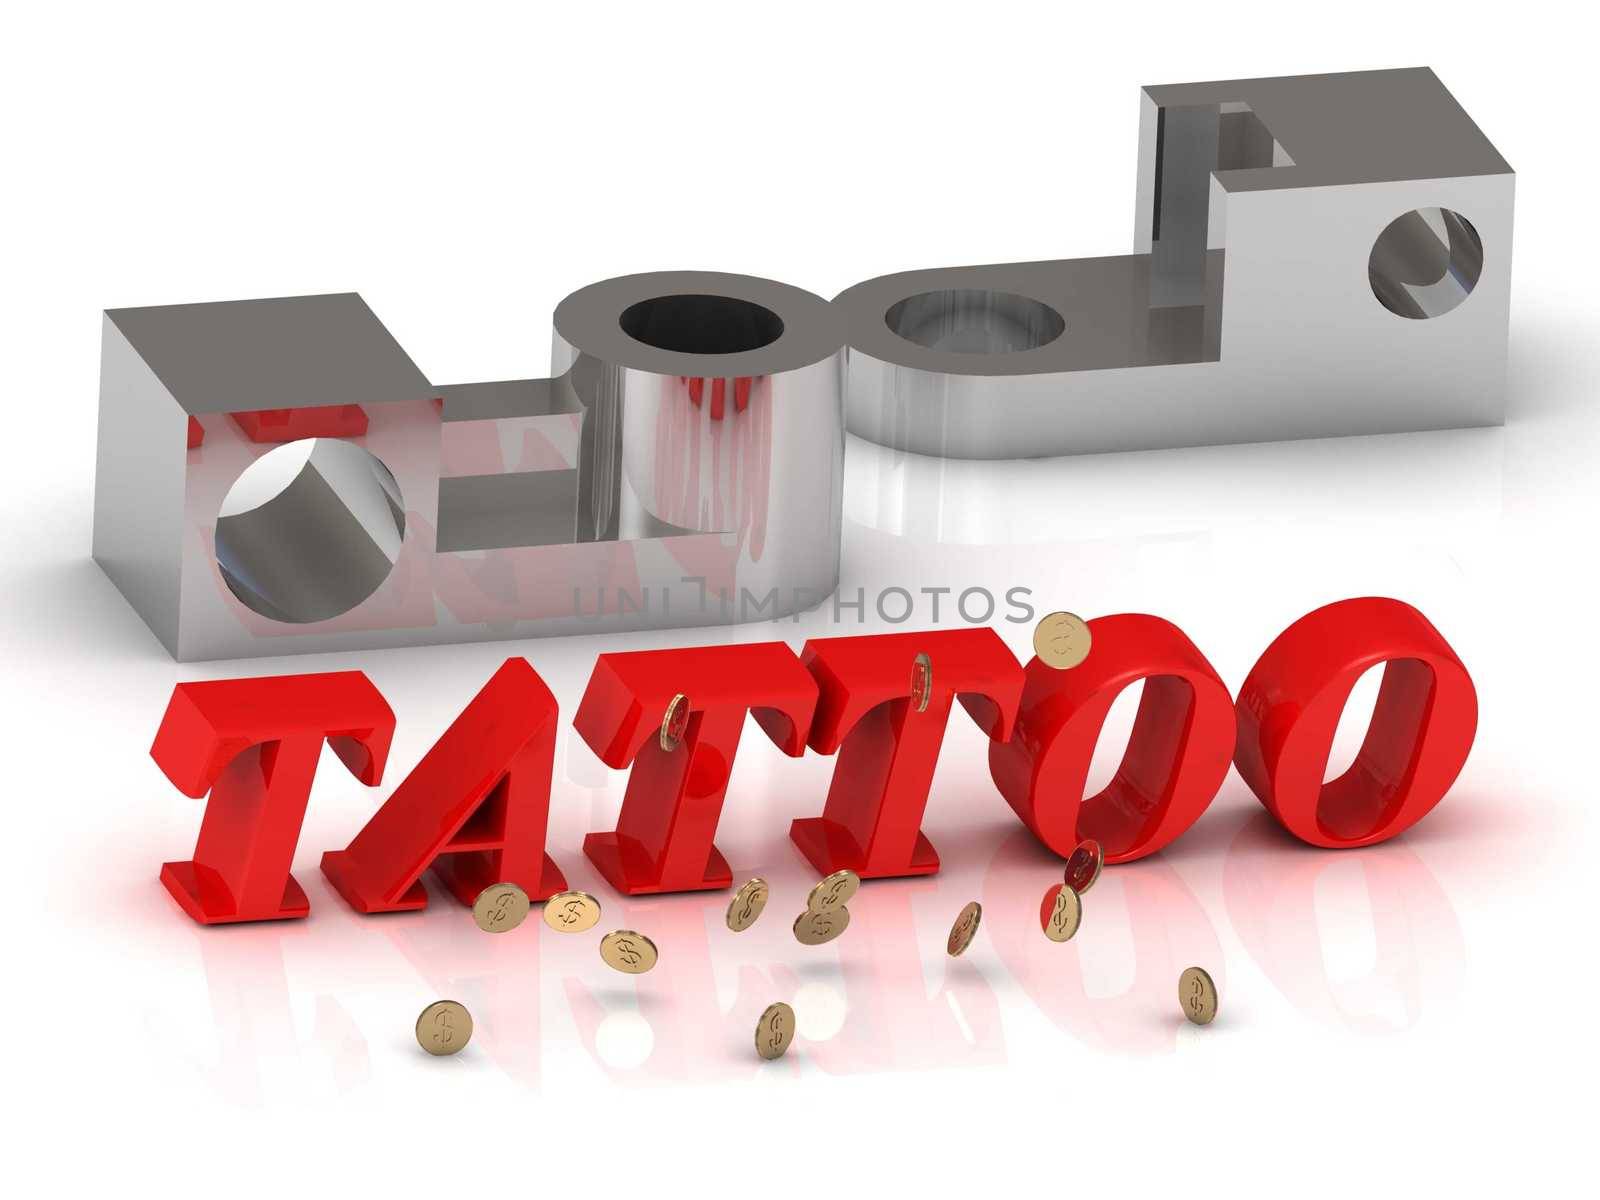 TATTOO- inscription of red letters and silver details on white background